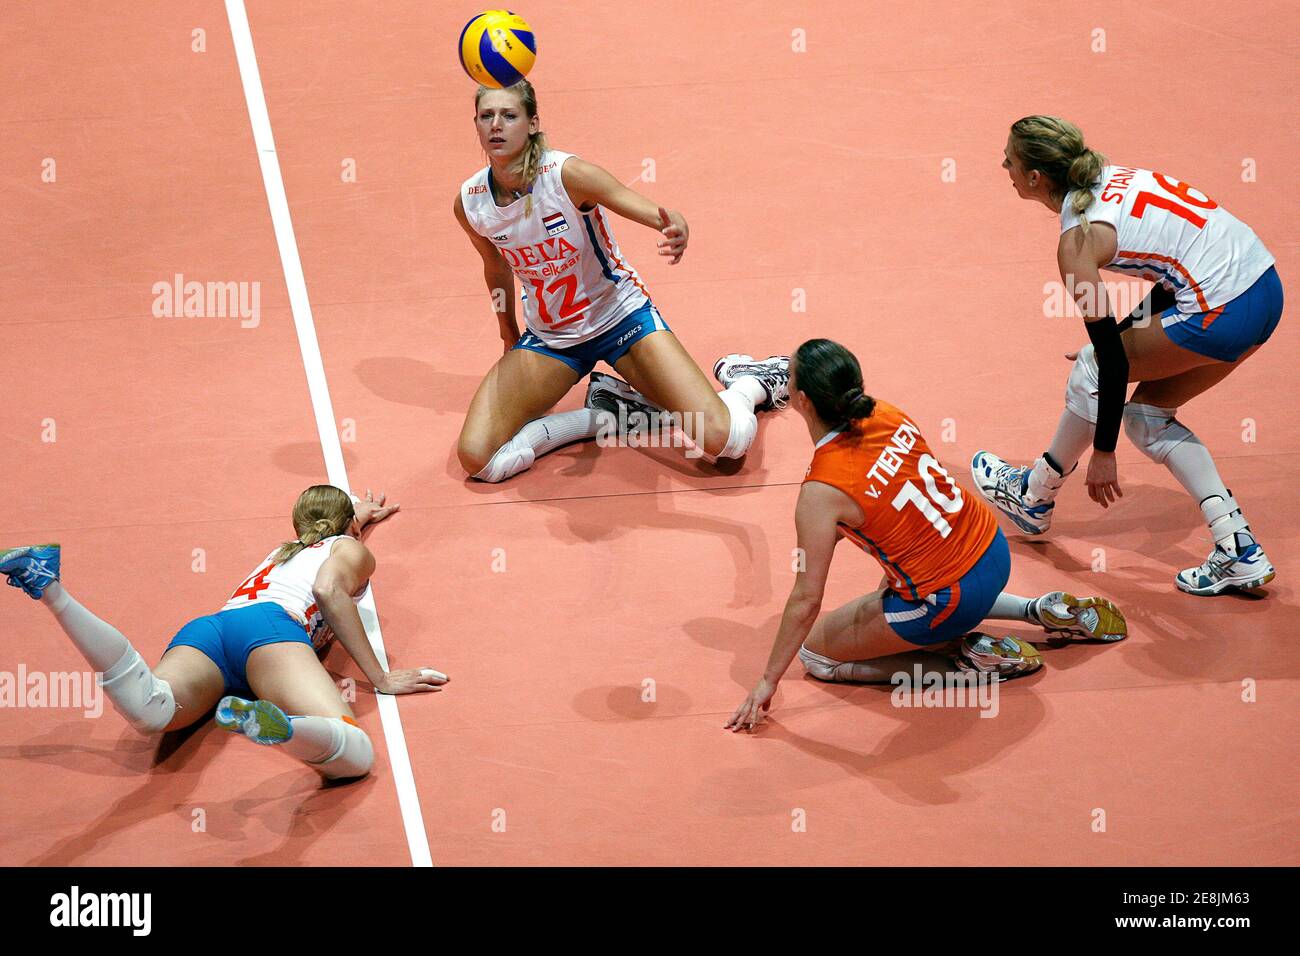 Manon Flier (12), Chaine Staelens (4), Janneke Van Tienen (10) and Debby Stam (16) of the Netherlands go for the ball during the team's FIVB World Grand Prix women's volleyball match against the Dominican Republic in Hong Kong August 15, 2009.       REUTERS/Tyrone Siu    (CHINA SPORT VOLLEYBALL) Stock Photo